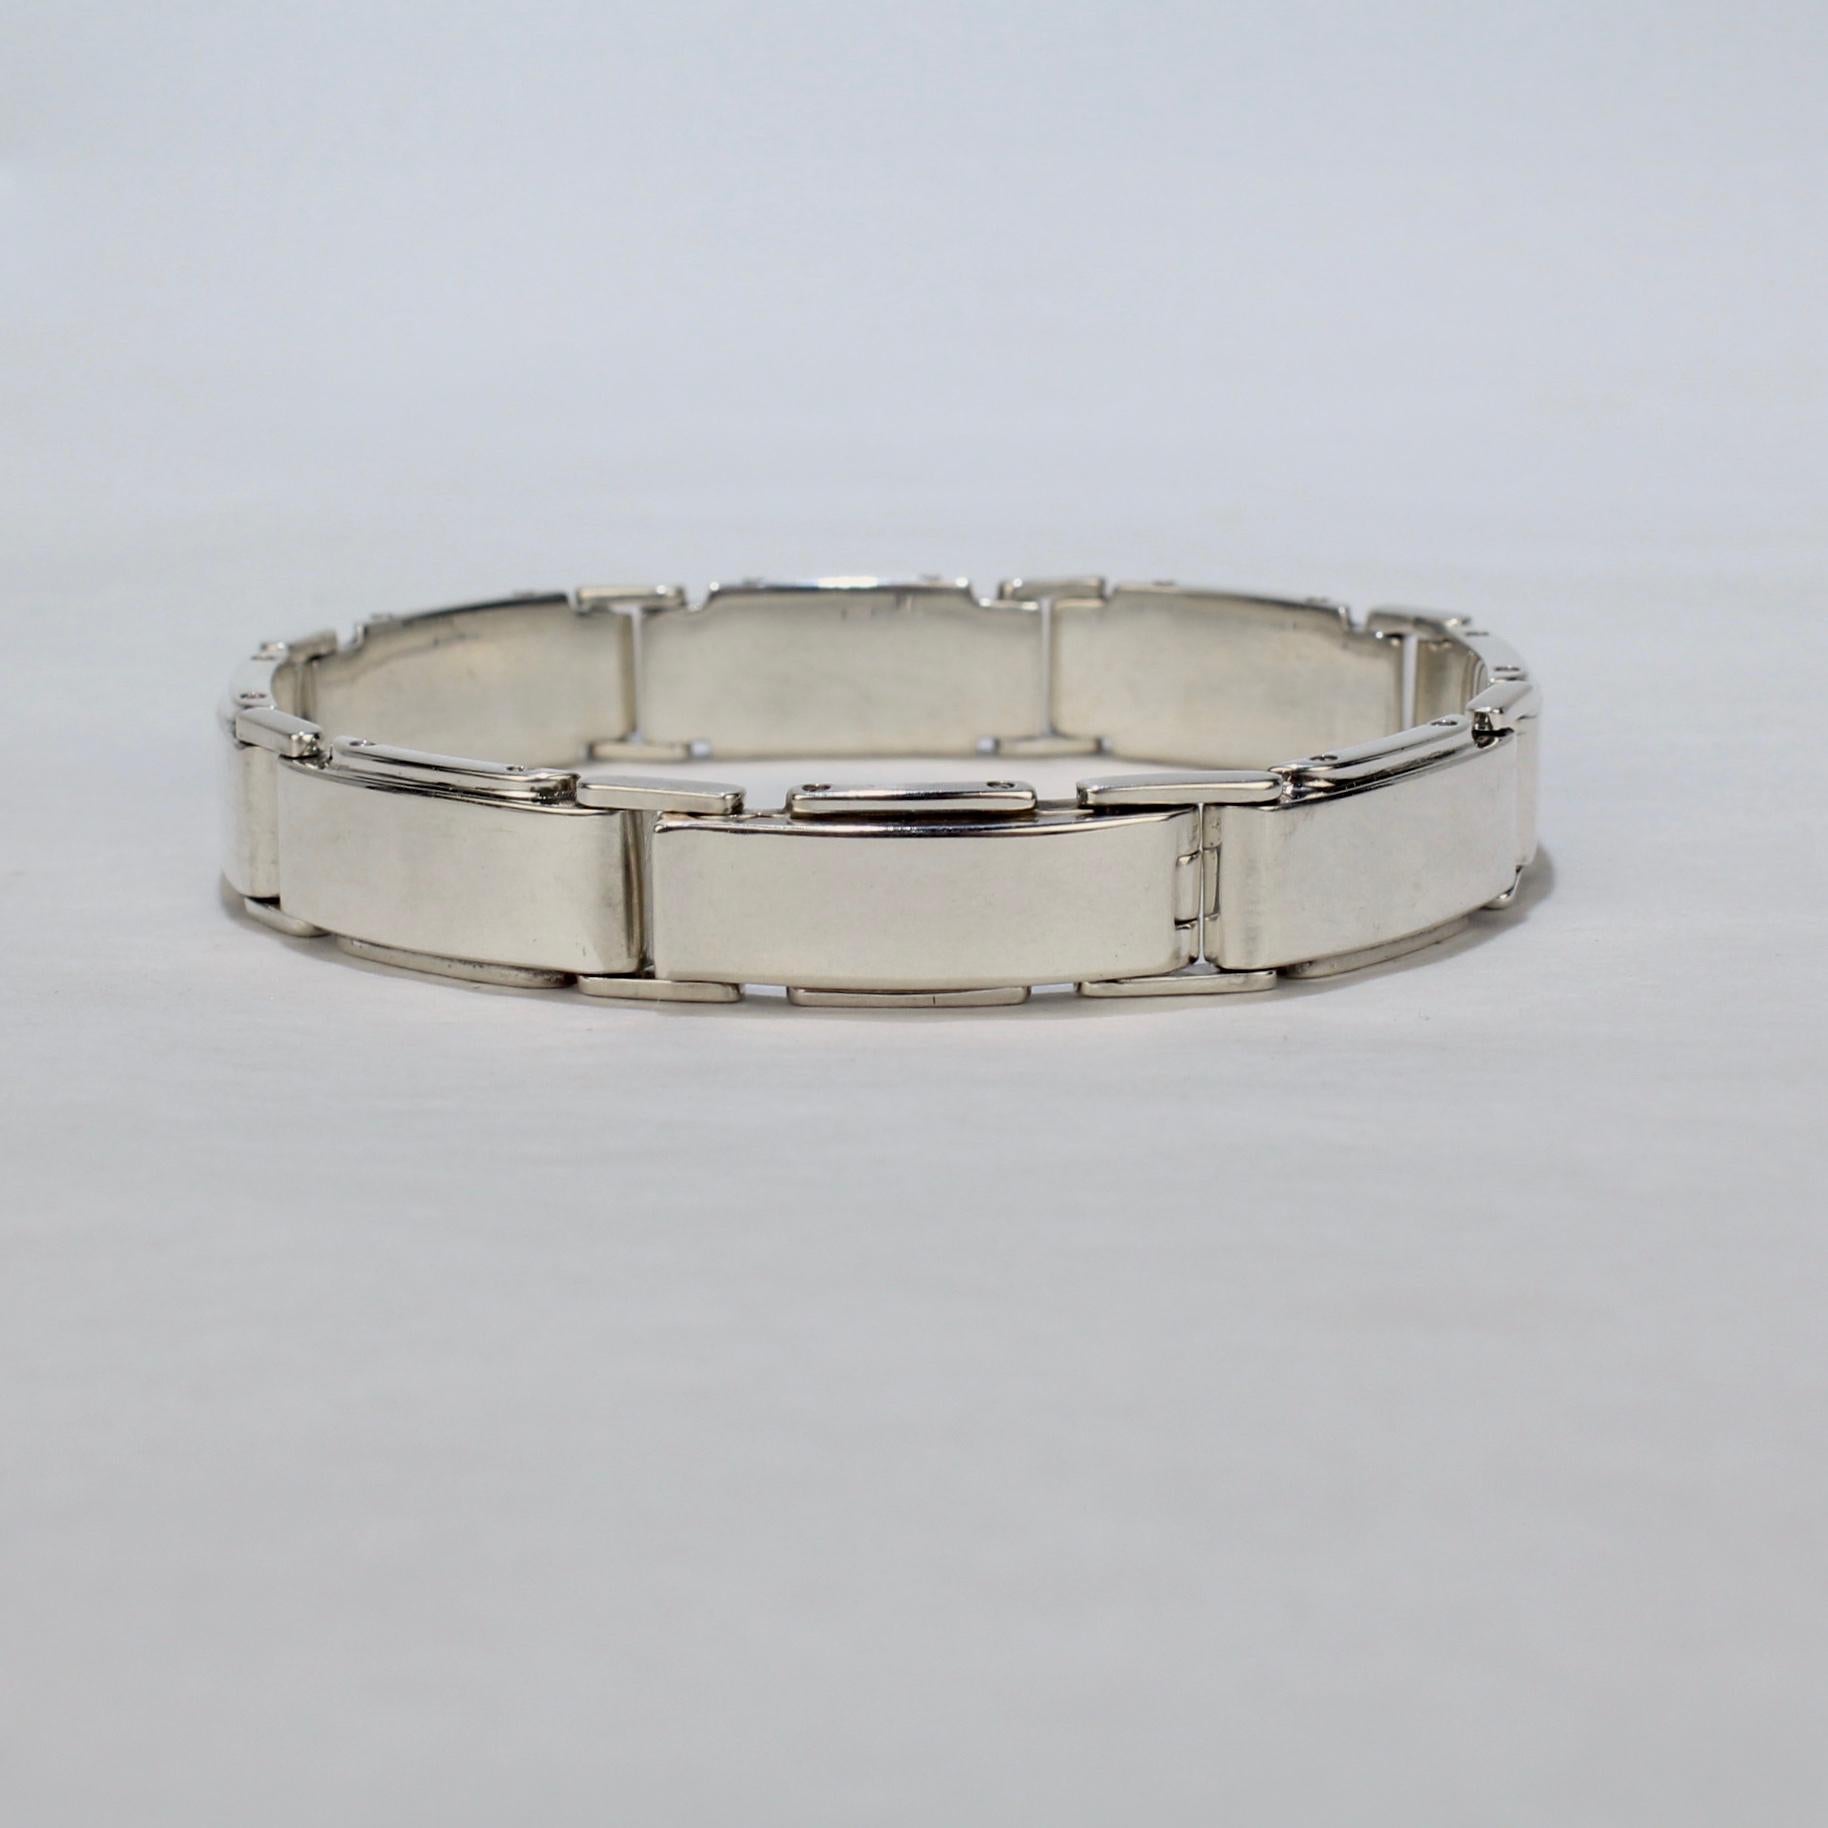 A vintage Tiffany & Co. bracelet.

In sterling silver. 

In the Metropolis pattern with Machine Age style slightly convex, rectangular link with faux rivets to their sides.

Simply a strong, masculine link bracelet by Tiffany!

Date:
Late 20th